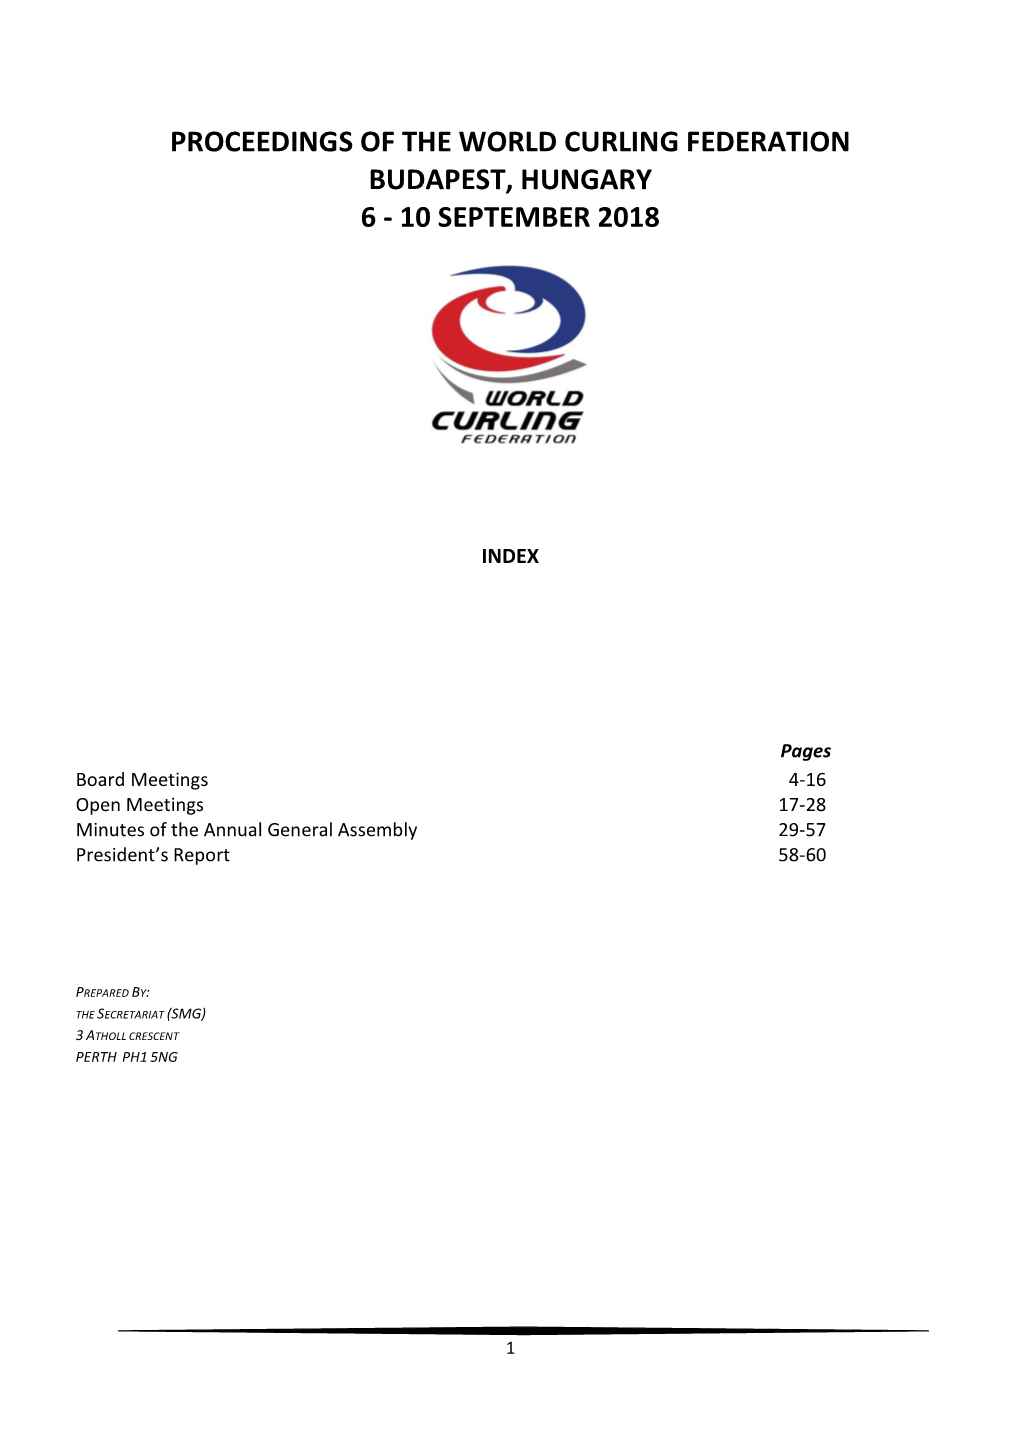 Proceedings of the World Curling Federation Budapest, Hungary 6 - 10 September 2018